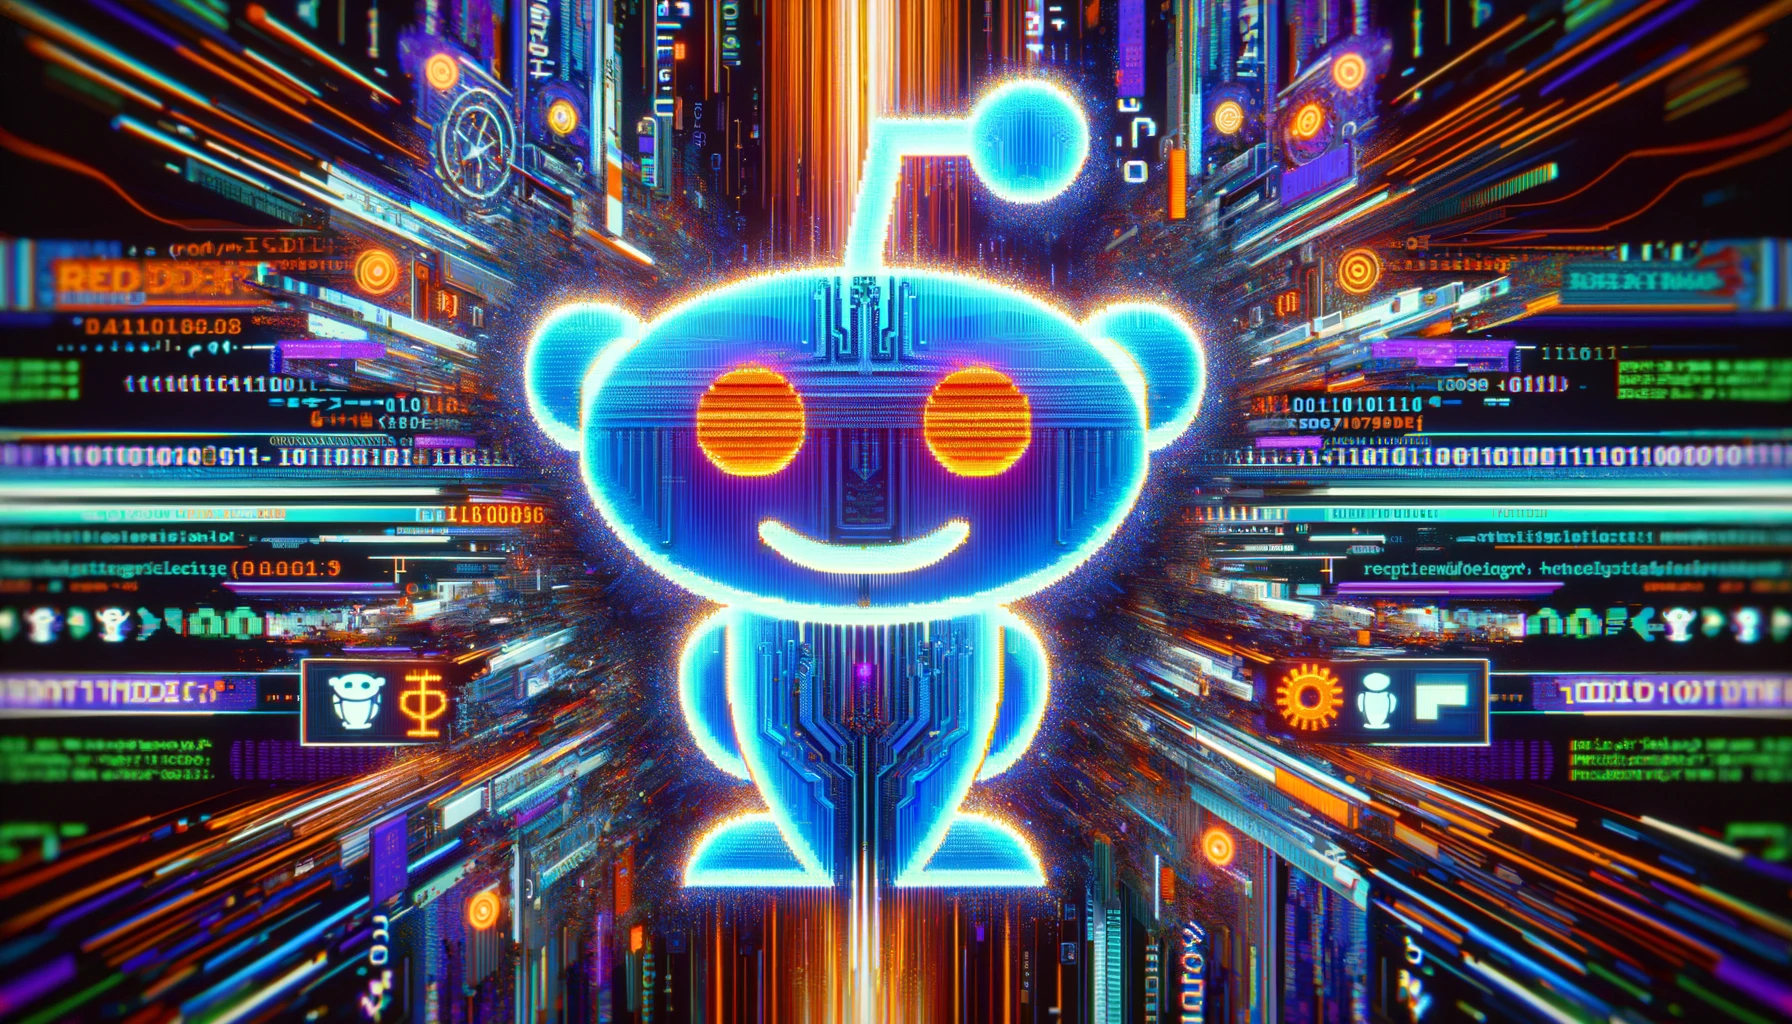 Reddit reportedly signs $60 million annual training data deal with Google